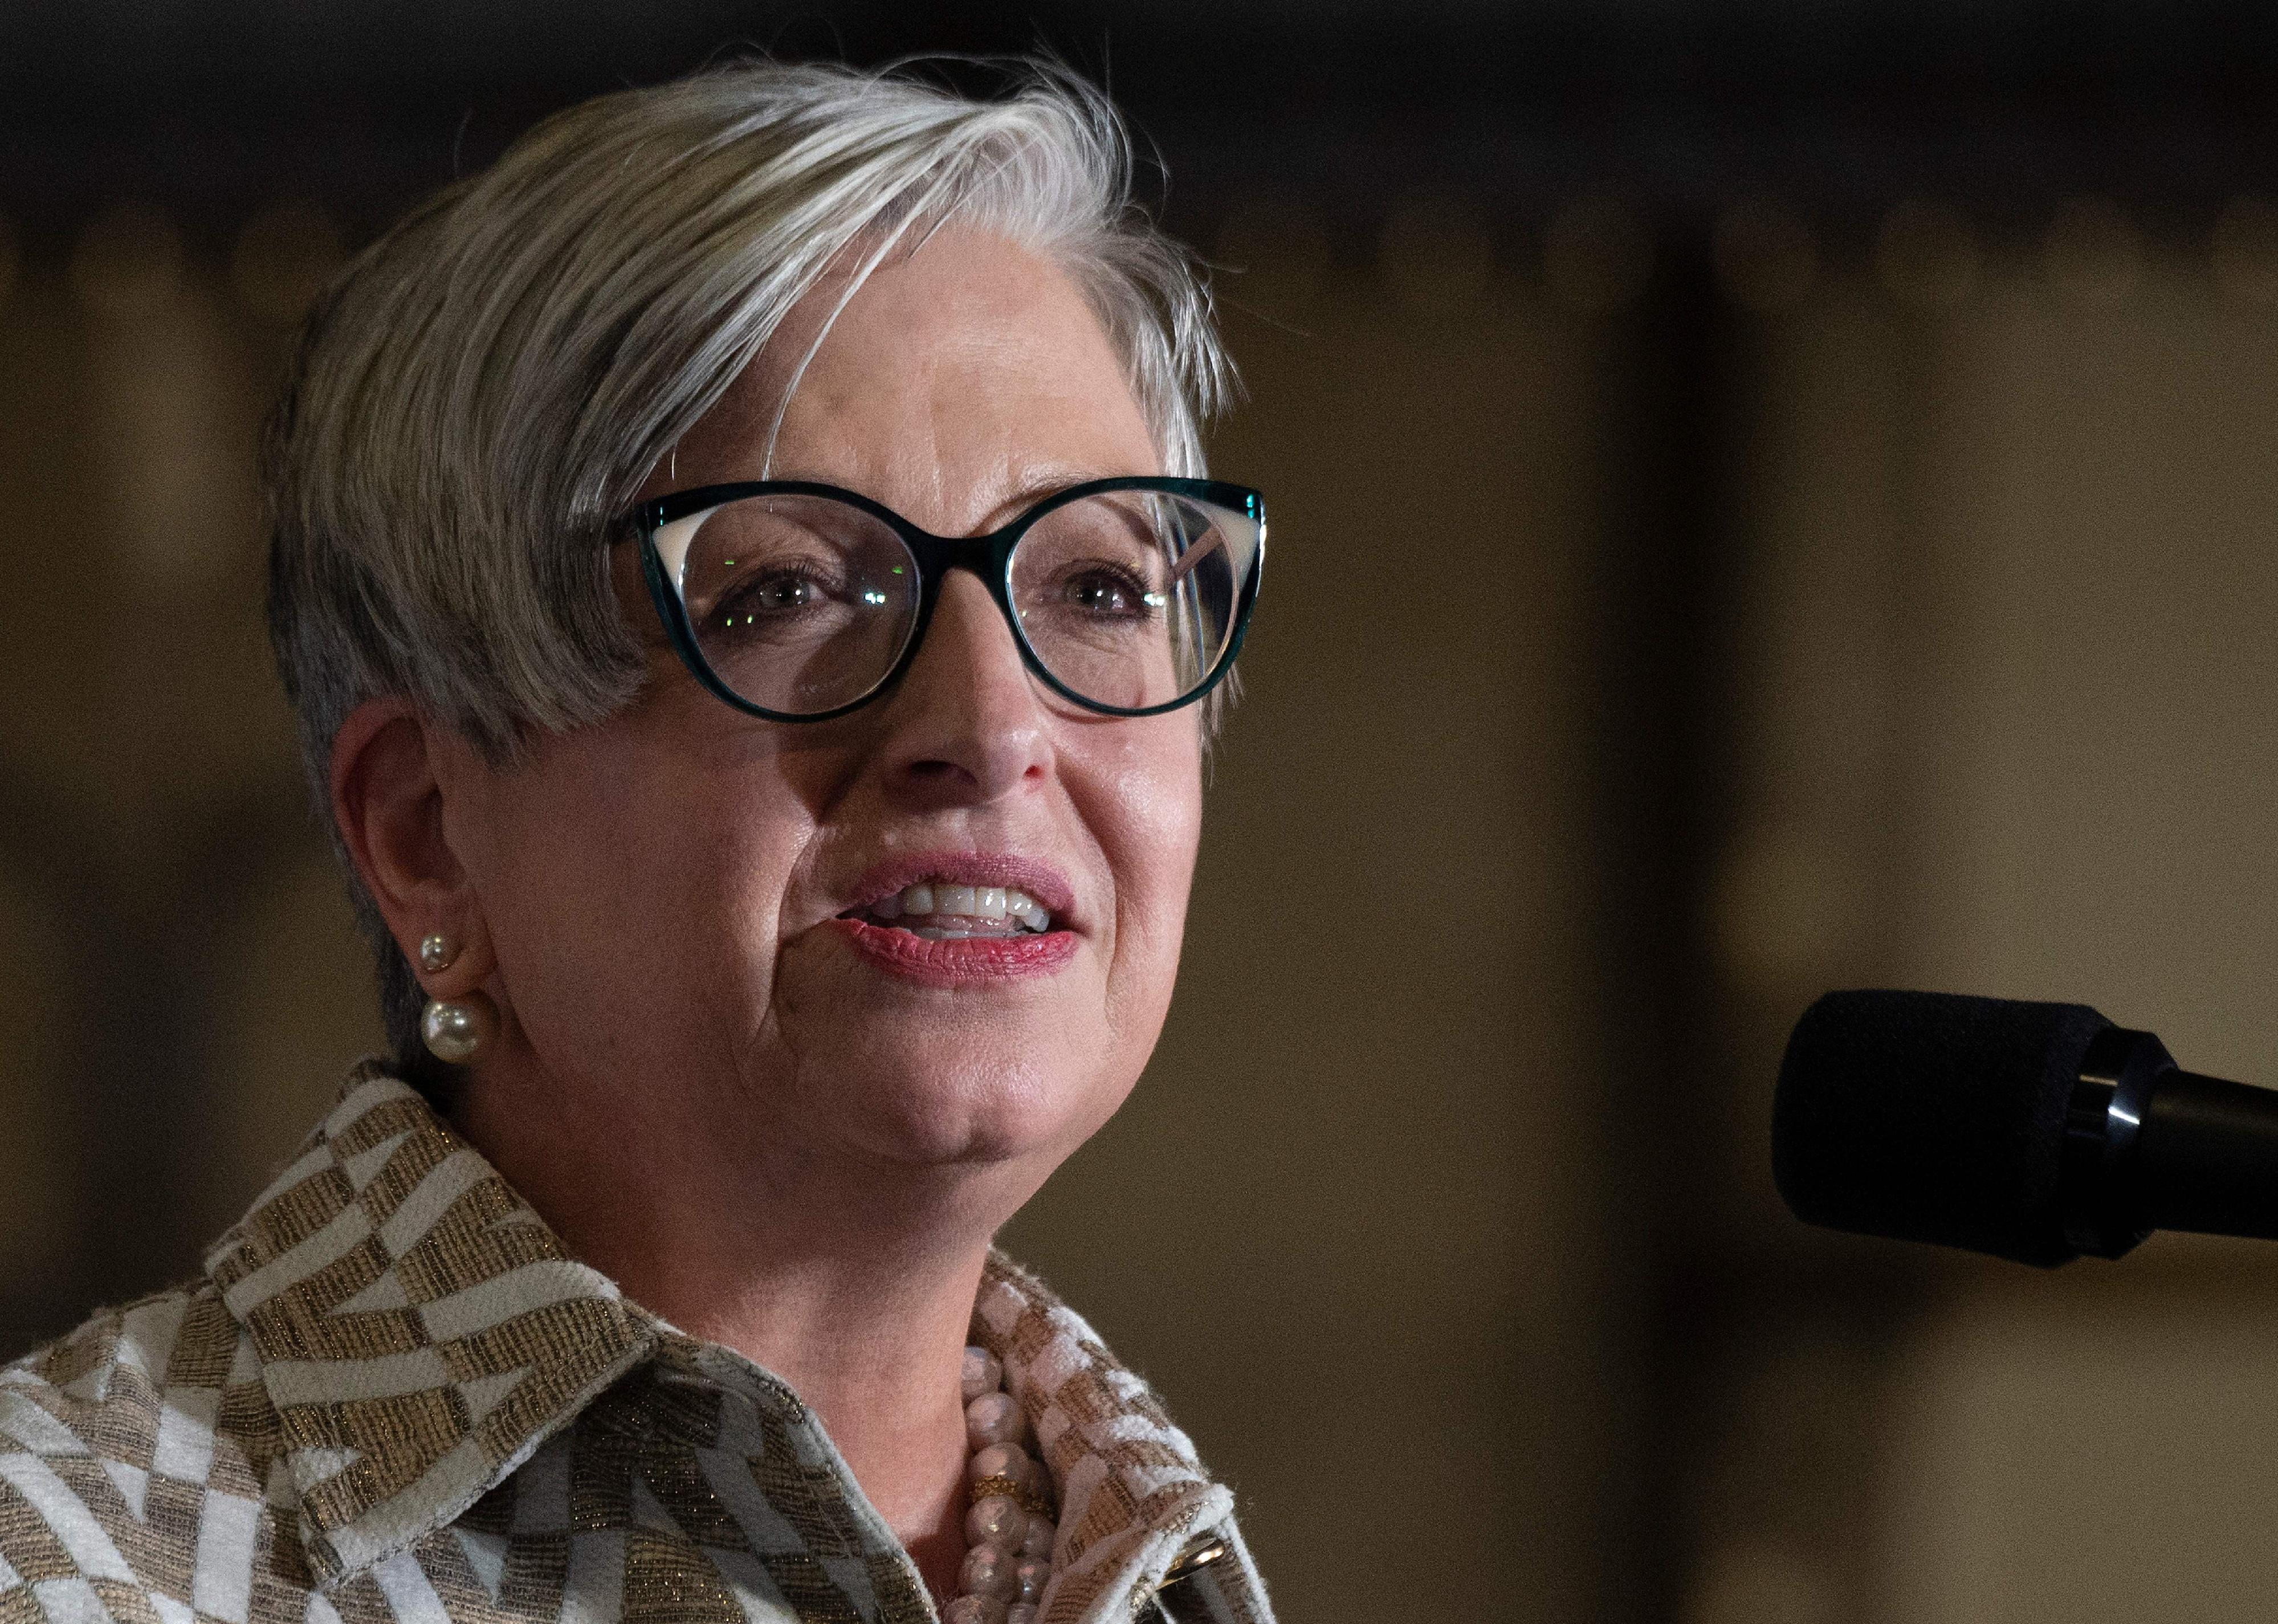 Carol Tomé, wearing pearl earrings, a gold and white patterned top and dark framed round glasses, speaking at an event.